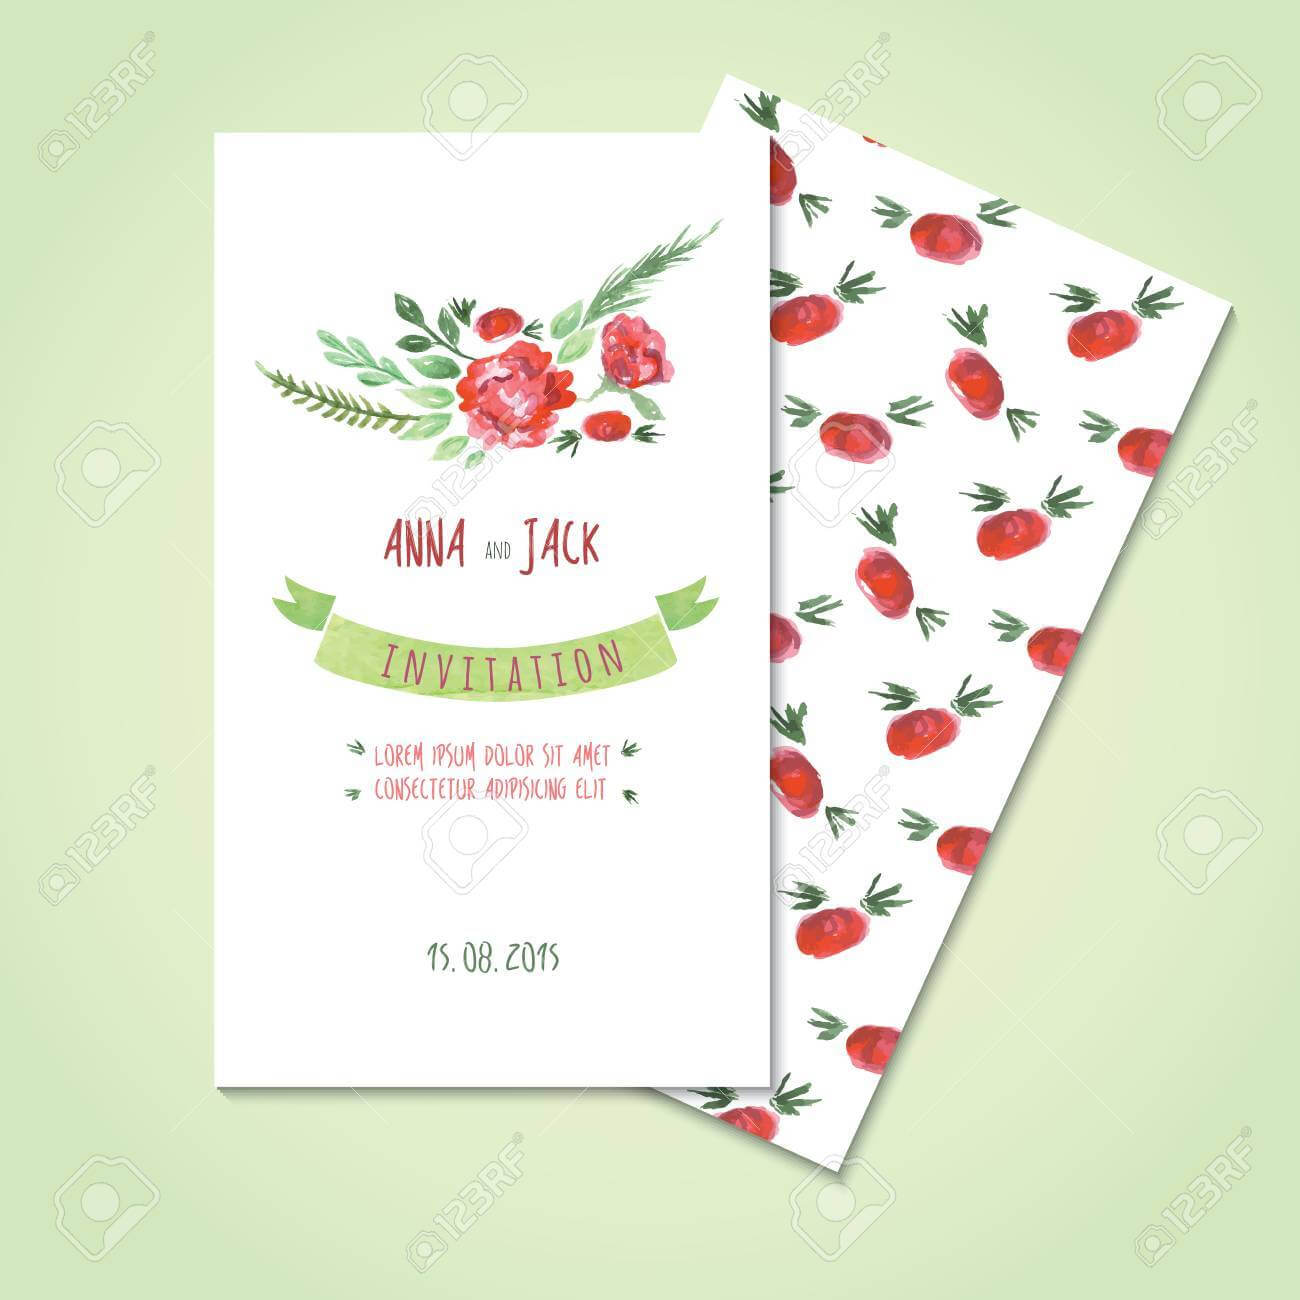 Watercolor Card Templates For Wedding Invitation Save The Date.. Pertaining To Save The Date Cards Templates